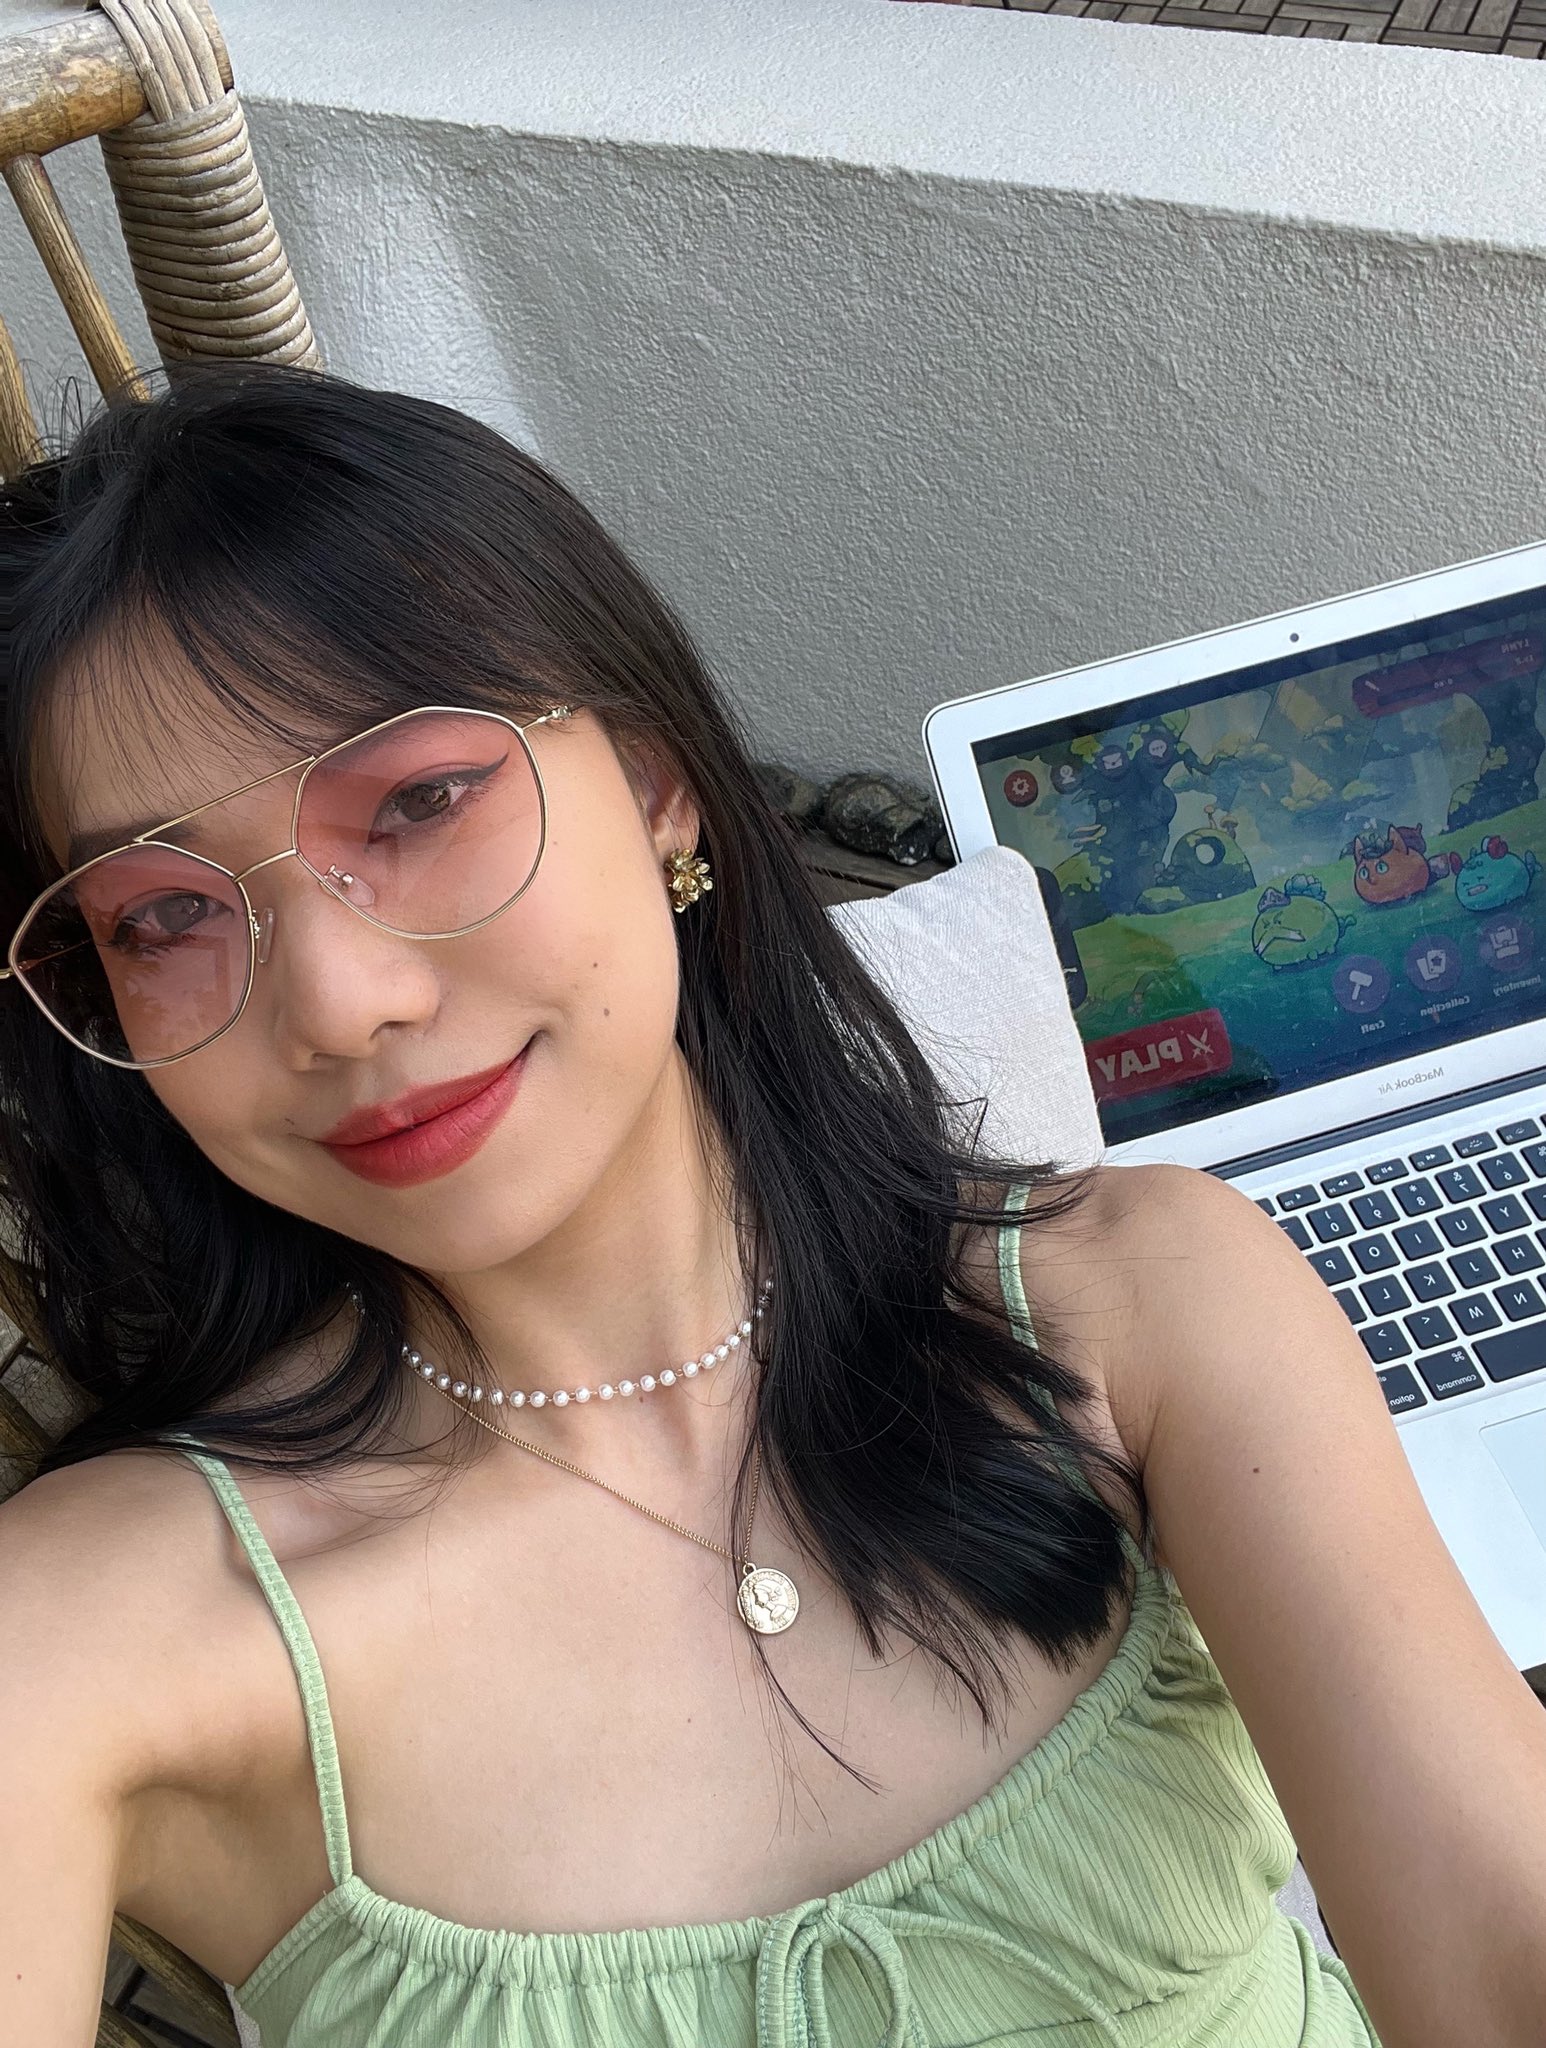 RT AxieArtGallery: Axie Infinity Monday selfie!!  Summer is coming and my axies and I are getting tanned 👀🌞  It’s been a whole year since I joined this beautiful living ecosystem  When did you join?❤️ [twitter.com] [pbs.twimg.com]